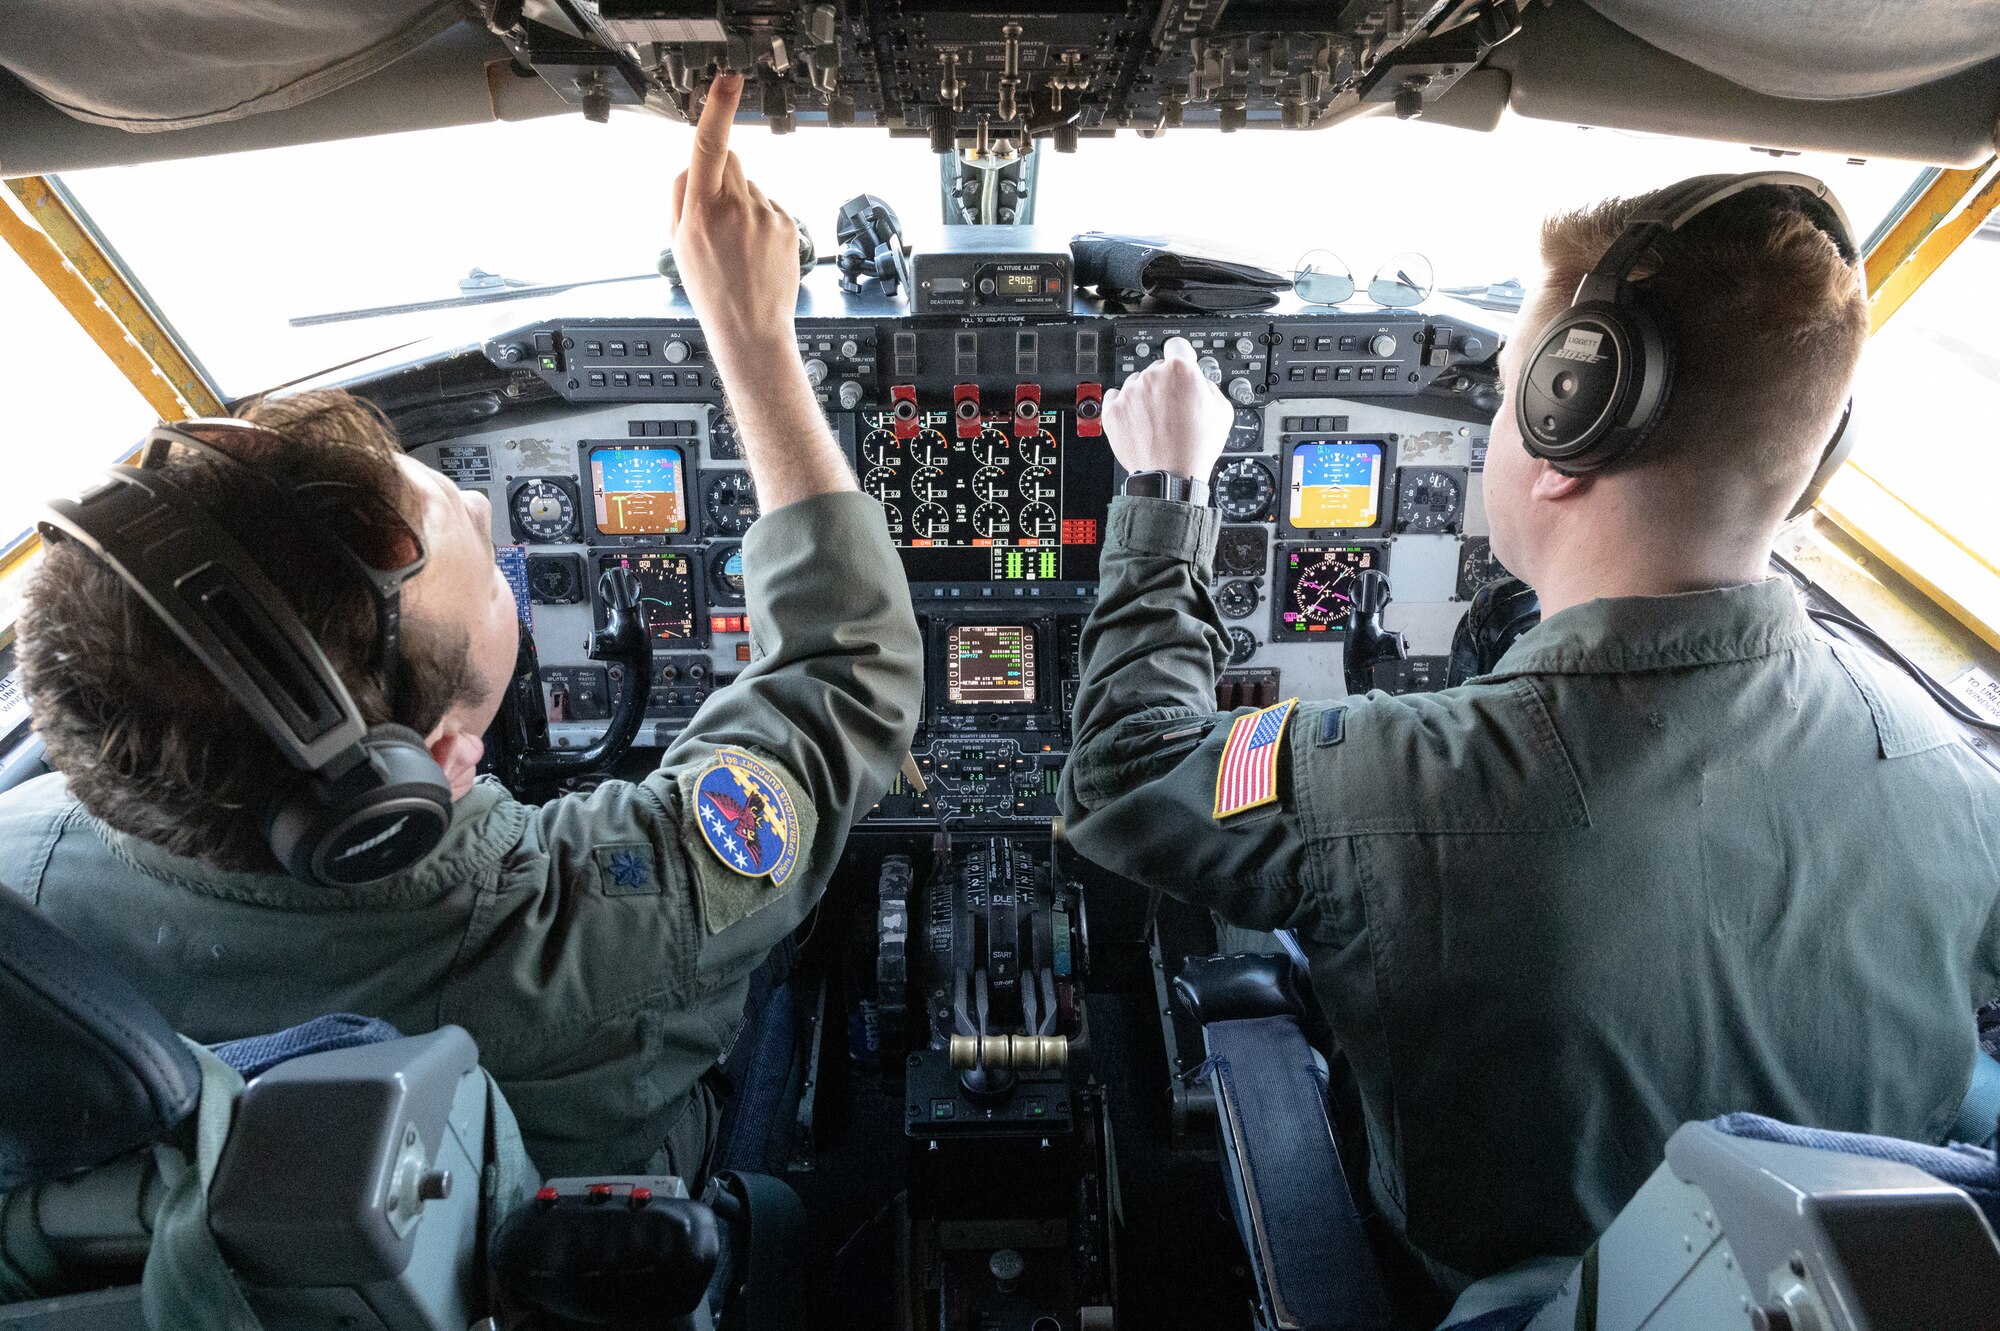 Two U.S. Air Force pilots check their control settings while doing a preflight checklist in the cockpit of a KC-135.